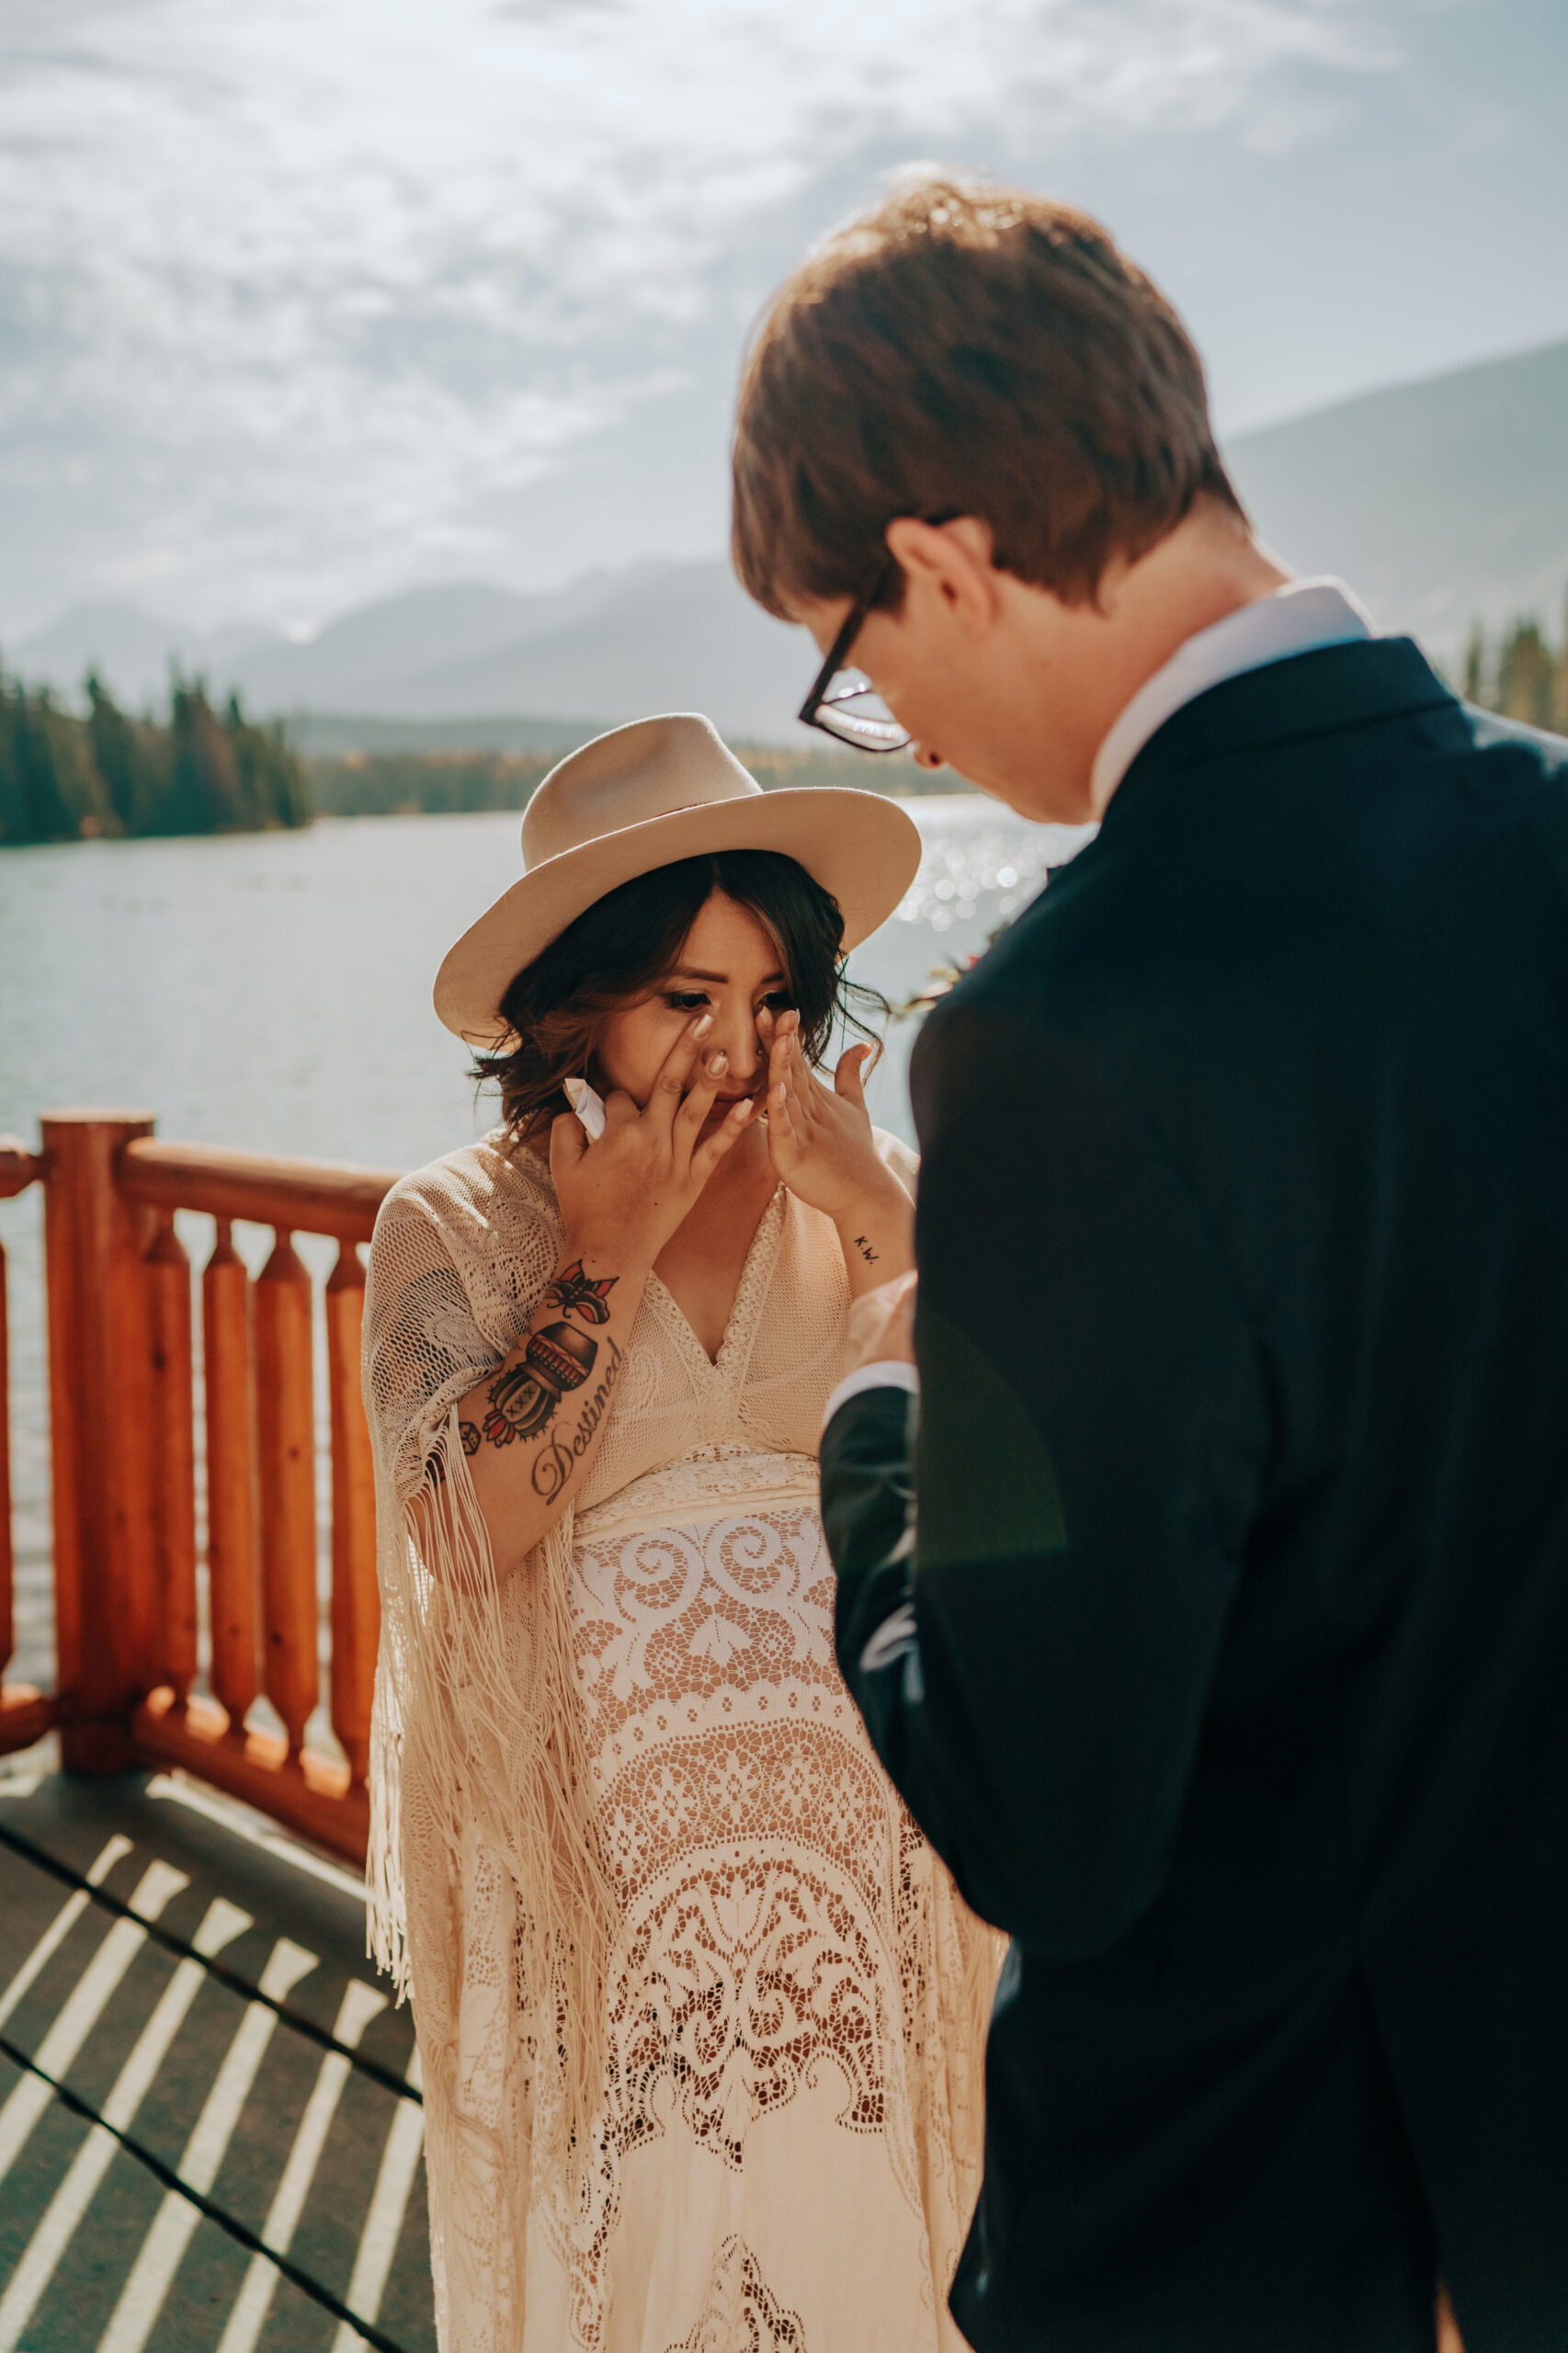 Boho bride in hat saying vows on deck overlooking lake